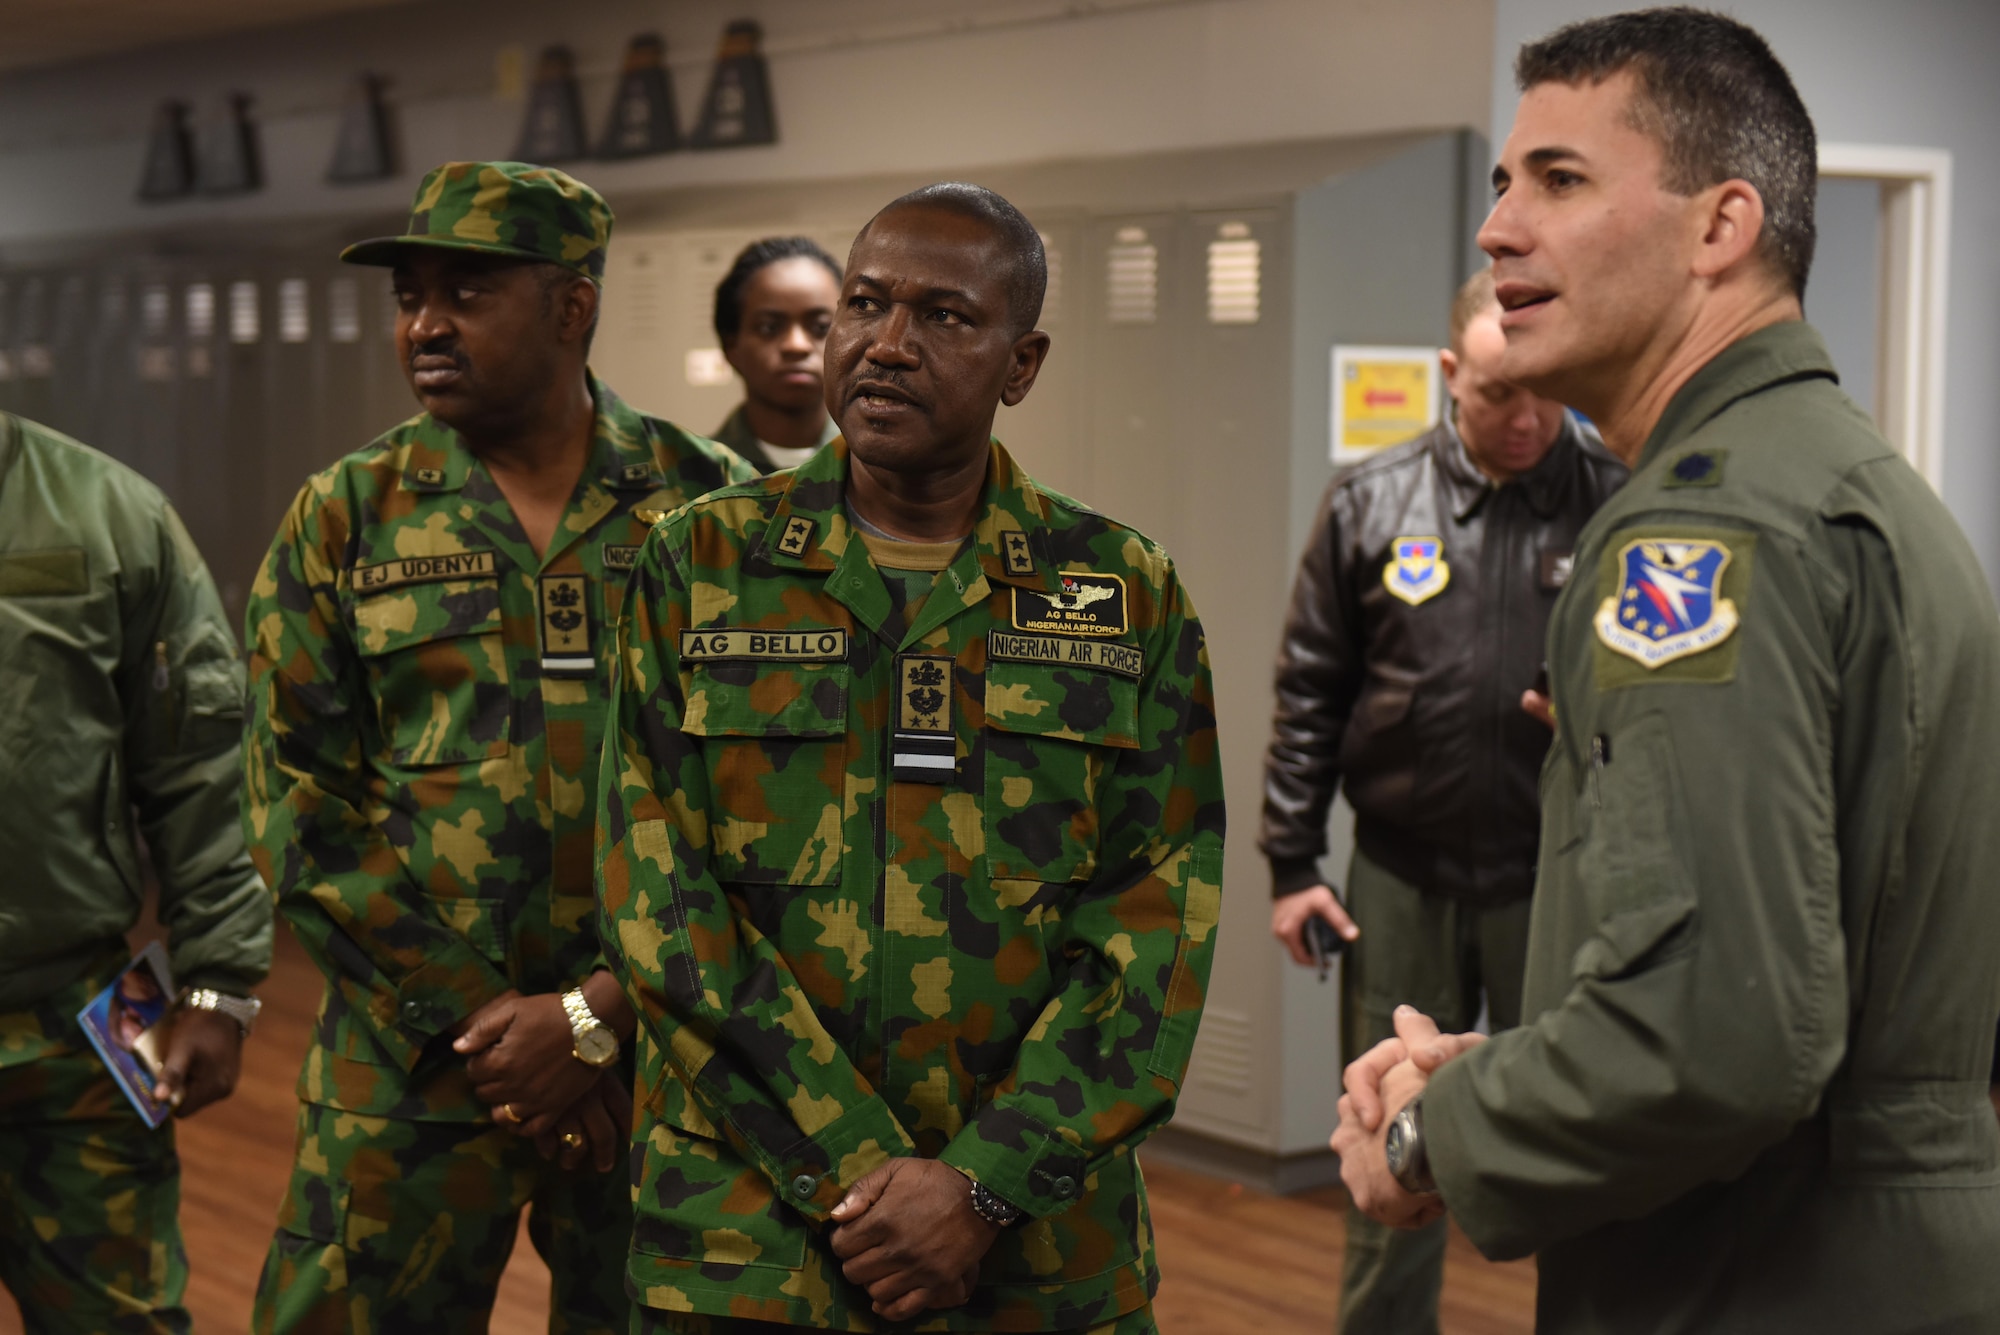 Air Vice-Marshal Aliyu Bello, director of training for the Nigerian Air Force, center, speaks with Lt. Col. Nathan Smith, 50th Flying Training Squadron commander Jan. 23, 2019, on Columbus Air Force Base, Mississippi. Bello and his team visited Columbus AFB to see how their student pilot was progressing in her training. (U.S. Air Force photo by Senior Airman Beaux Hebert)